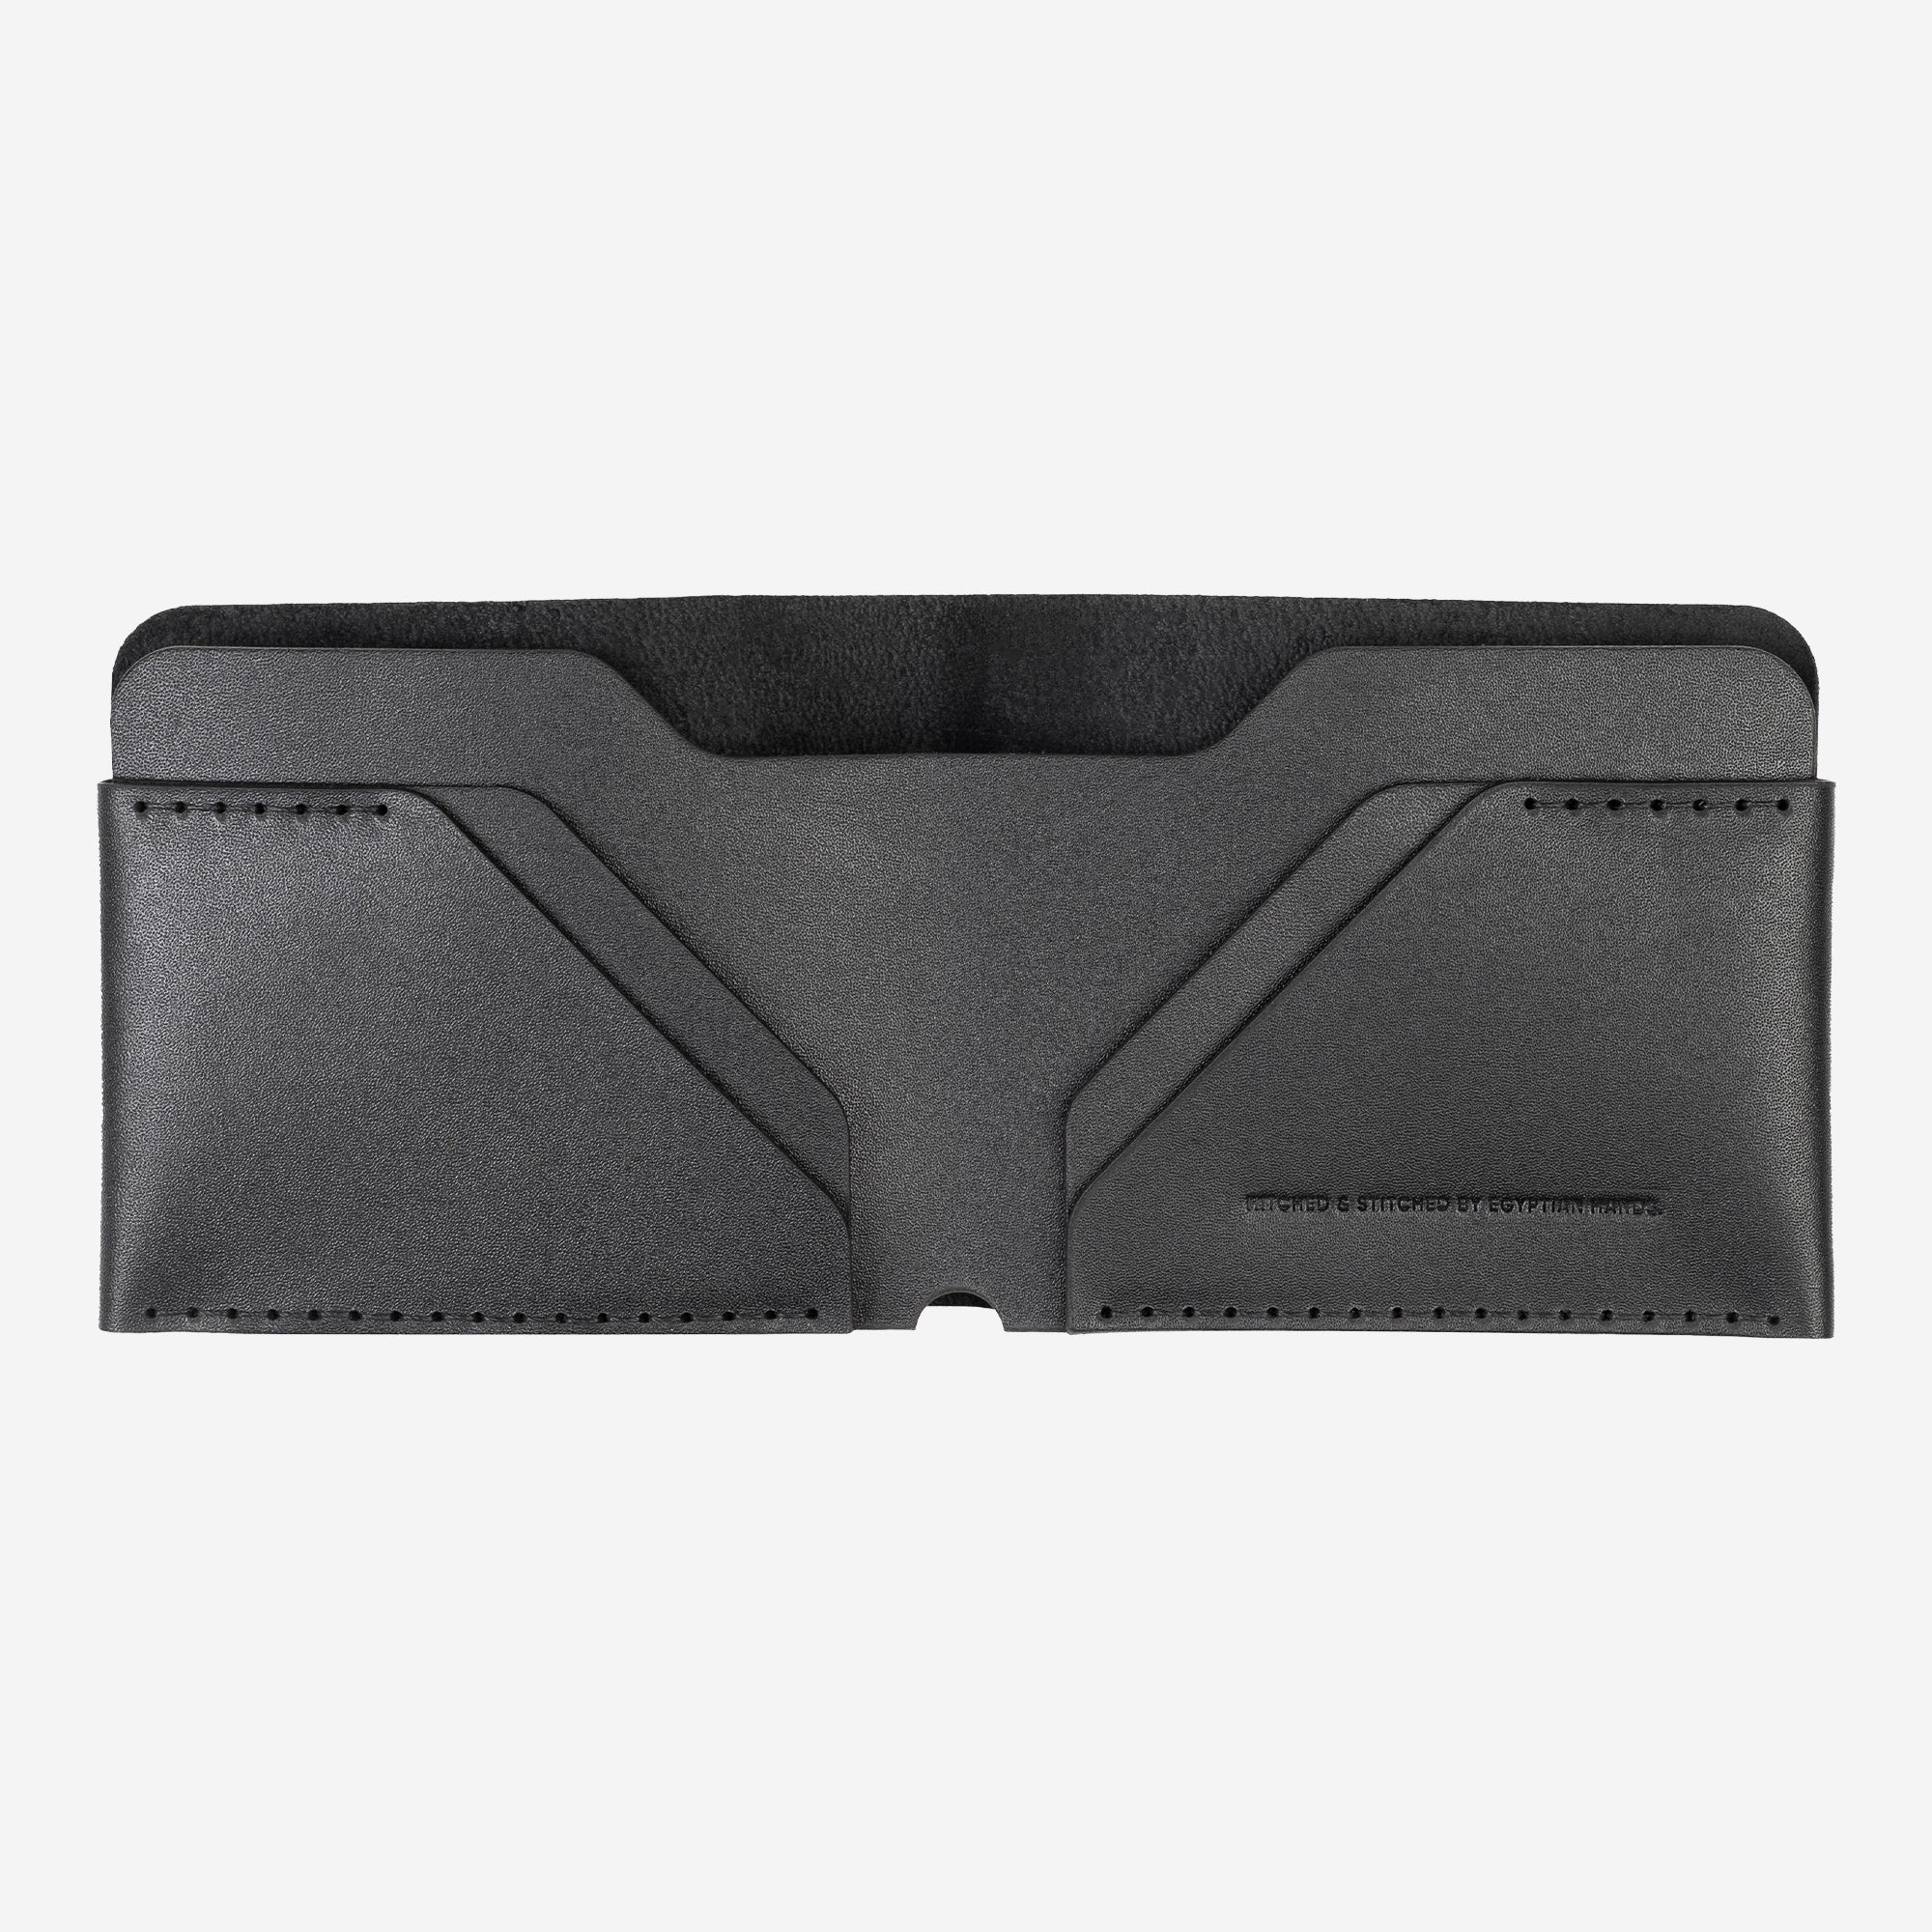 Black leather minimalist bfiold wallet isolated on a white background.